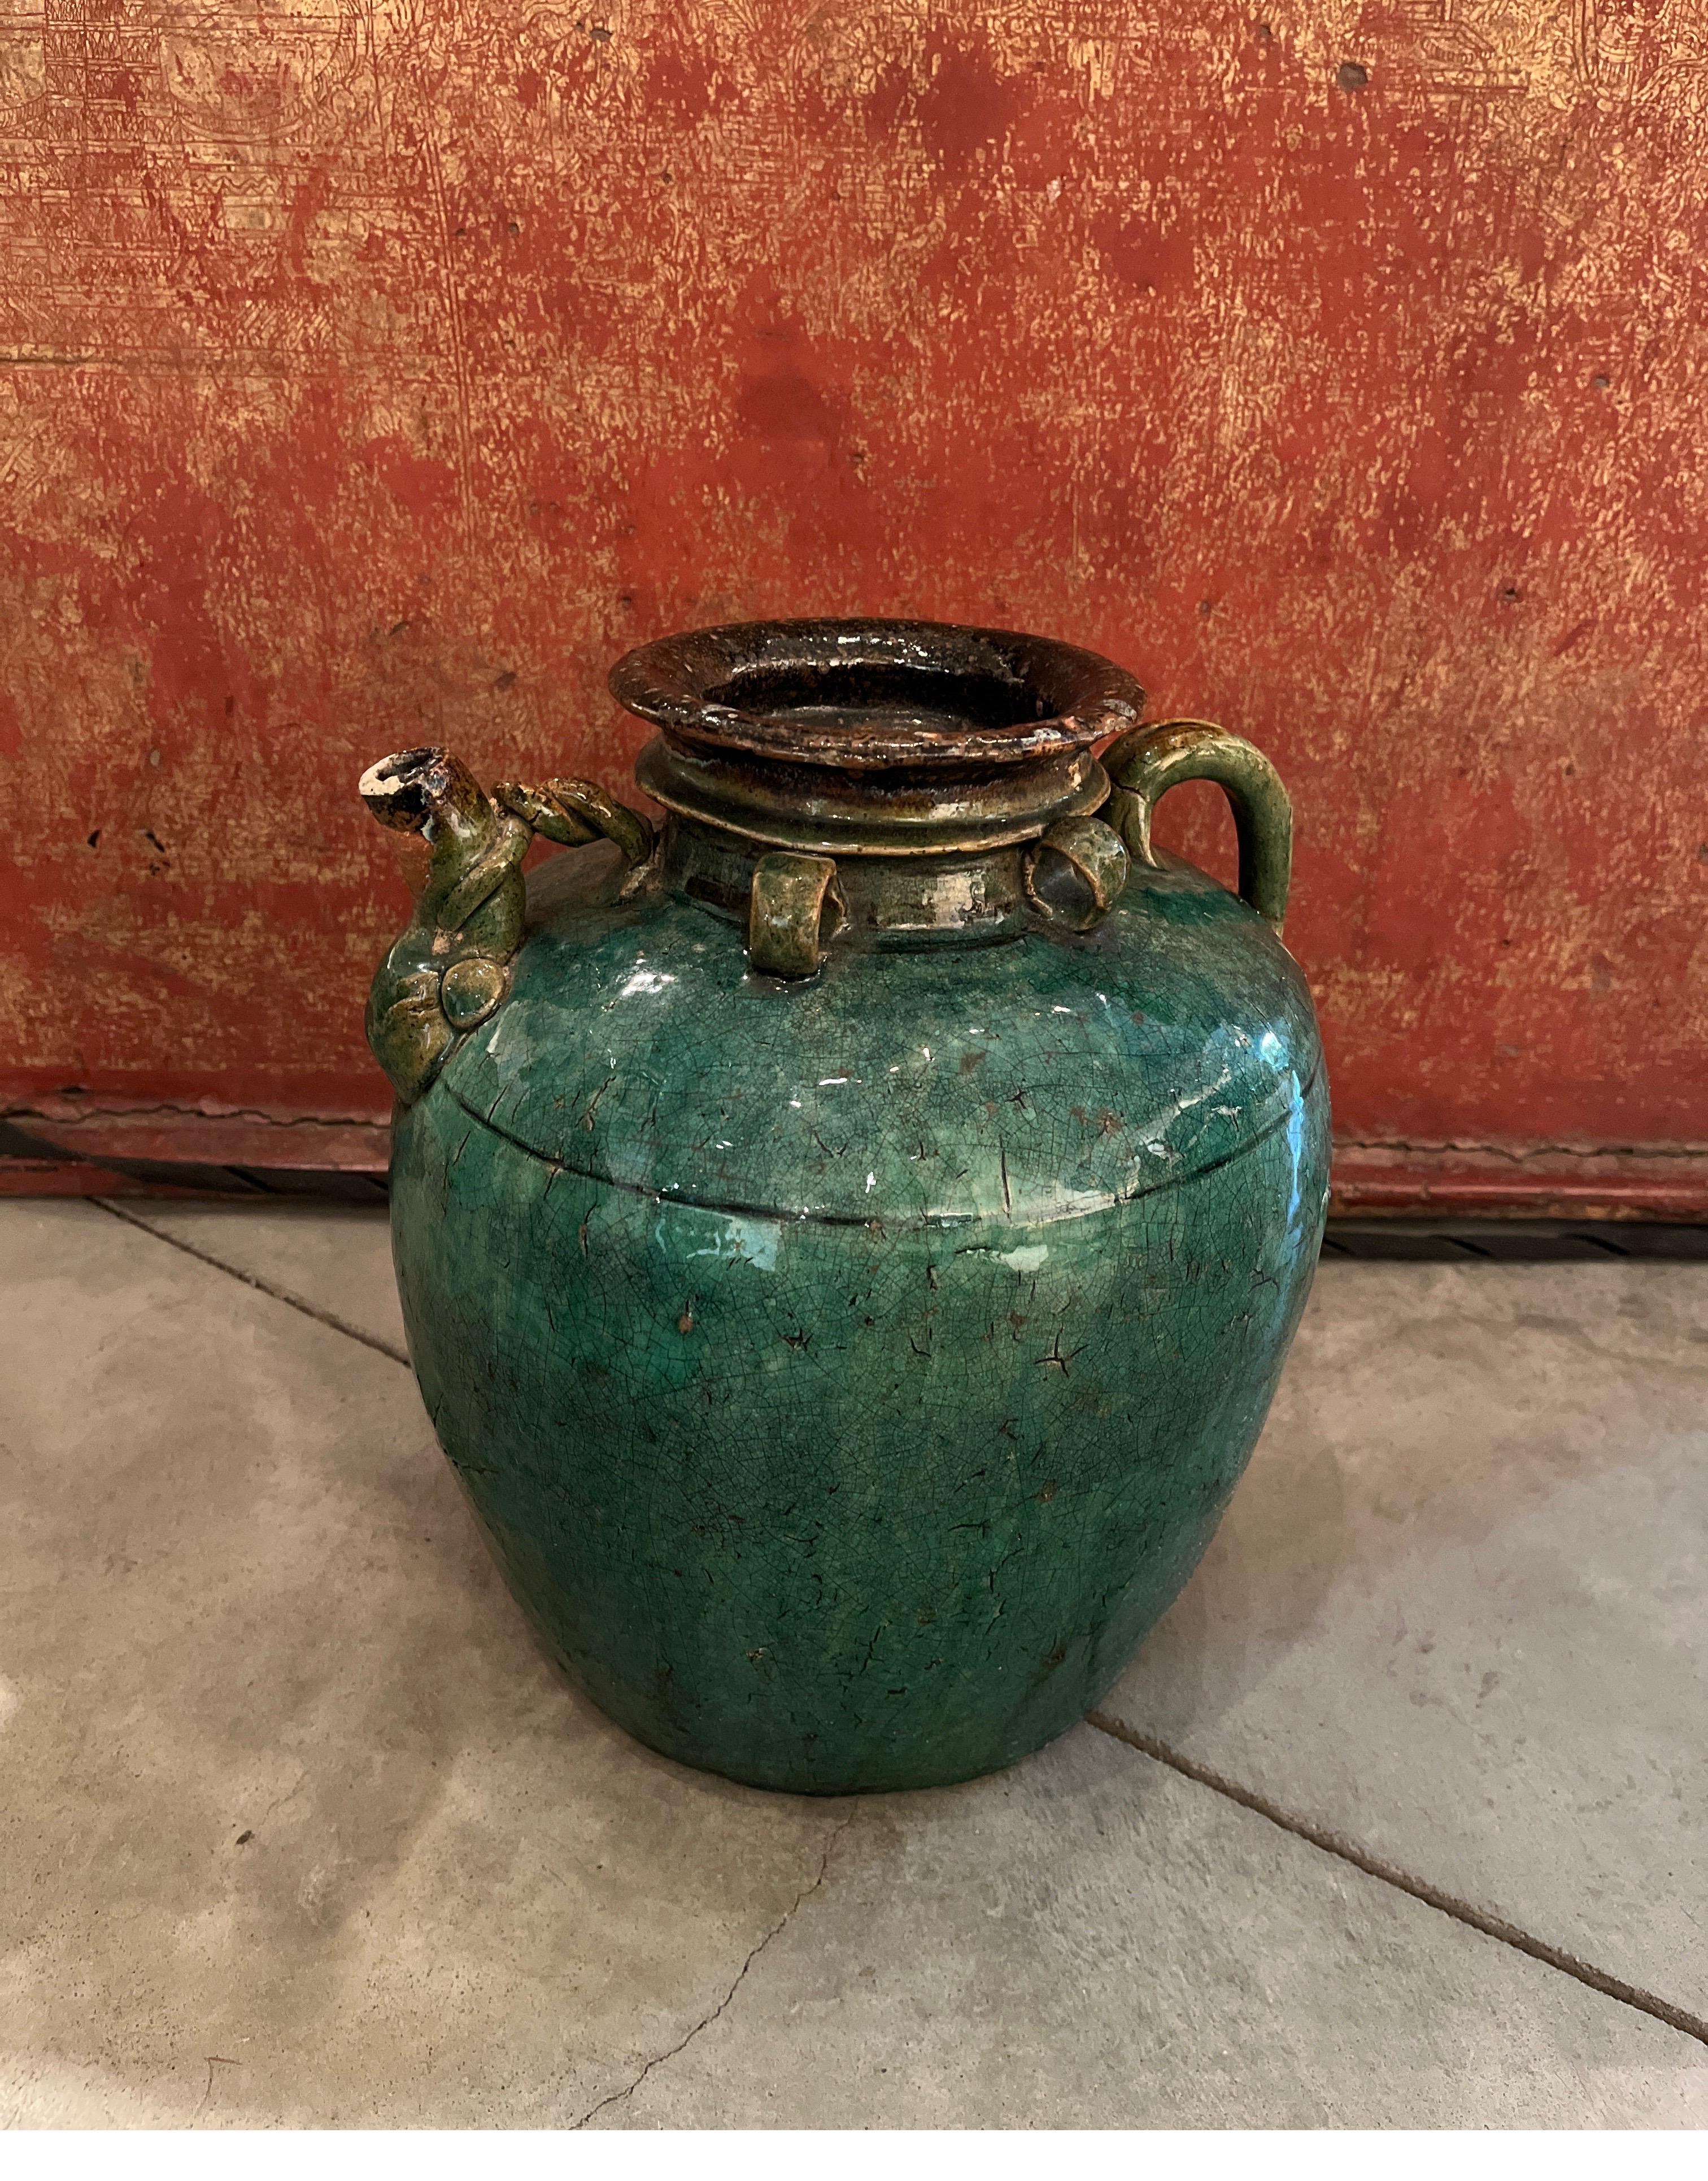 A gracefully shaped, antique Chinese ceramic wine vessel, with a gorgeous green glaze and a great patina produced during well over 100 years of use. An unusual and useful piece that provides striking visual interest, due to it's arresting color and